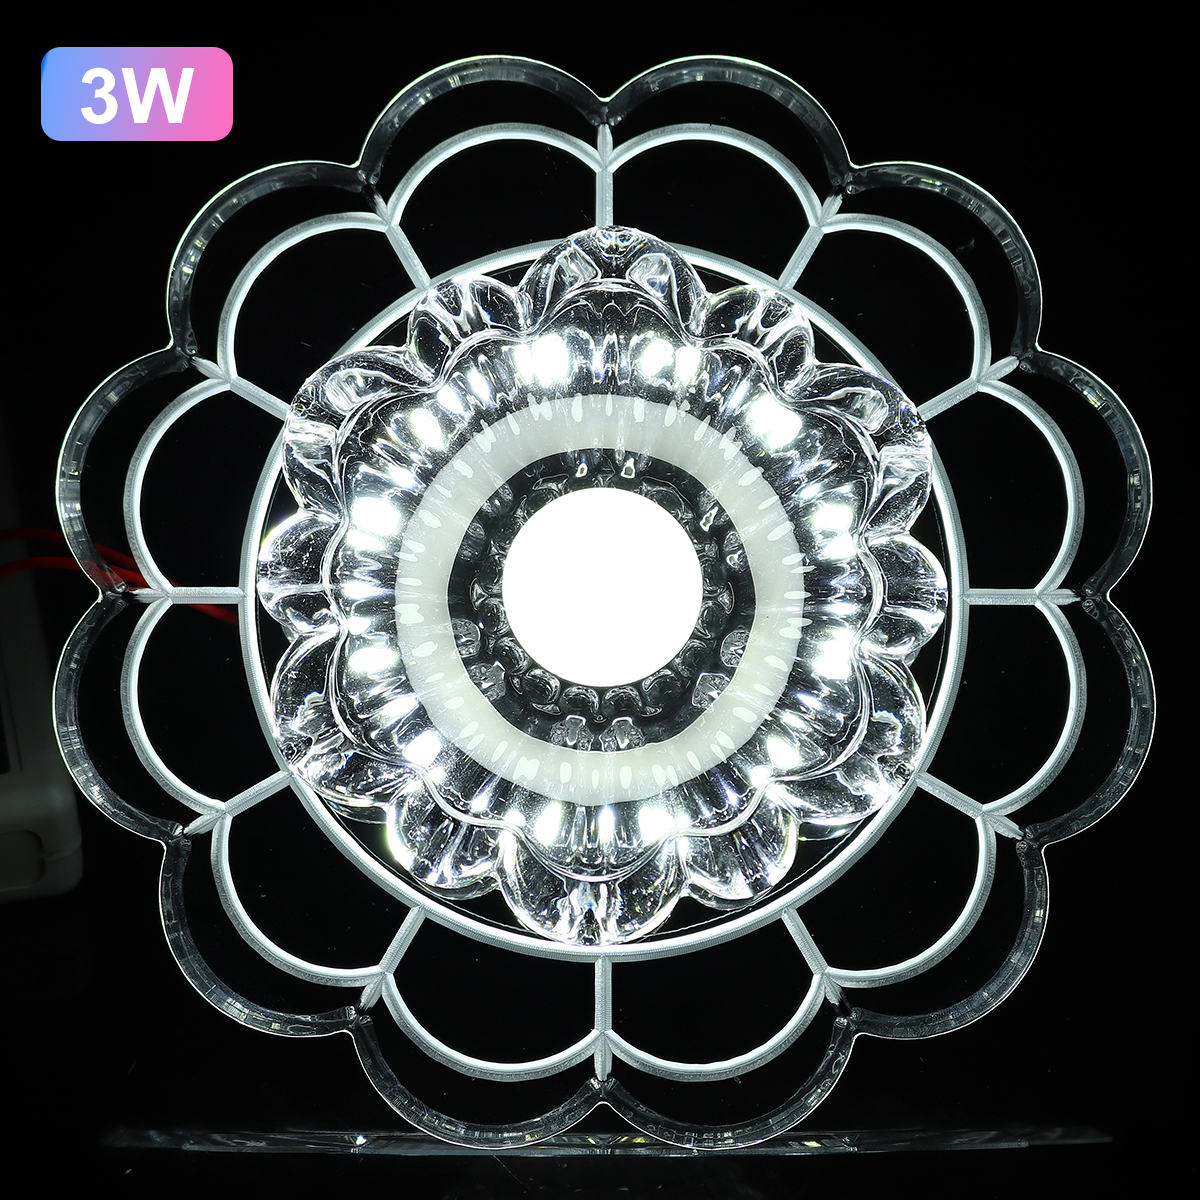 35W-79-LED-Crystal-Ceiling-Light-Ultra-Thin-Flush-Mount-Kitchen-Home-Fixture-1697198-4